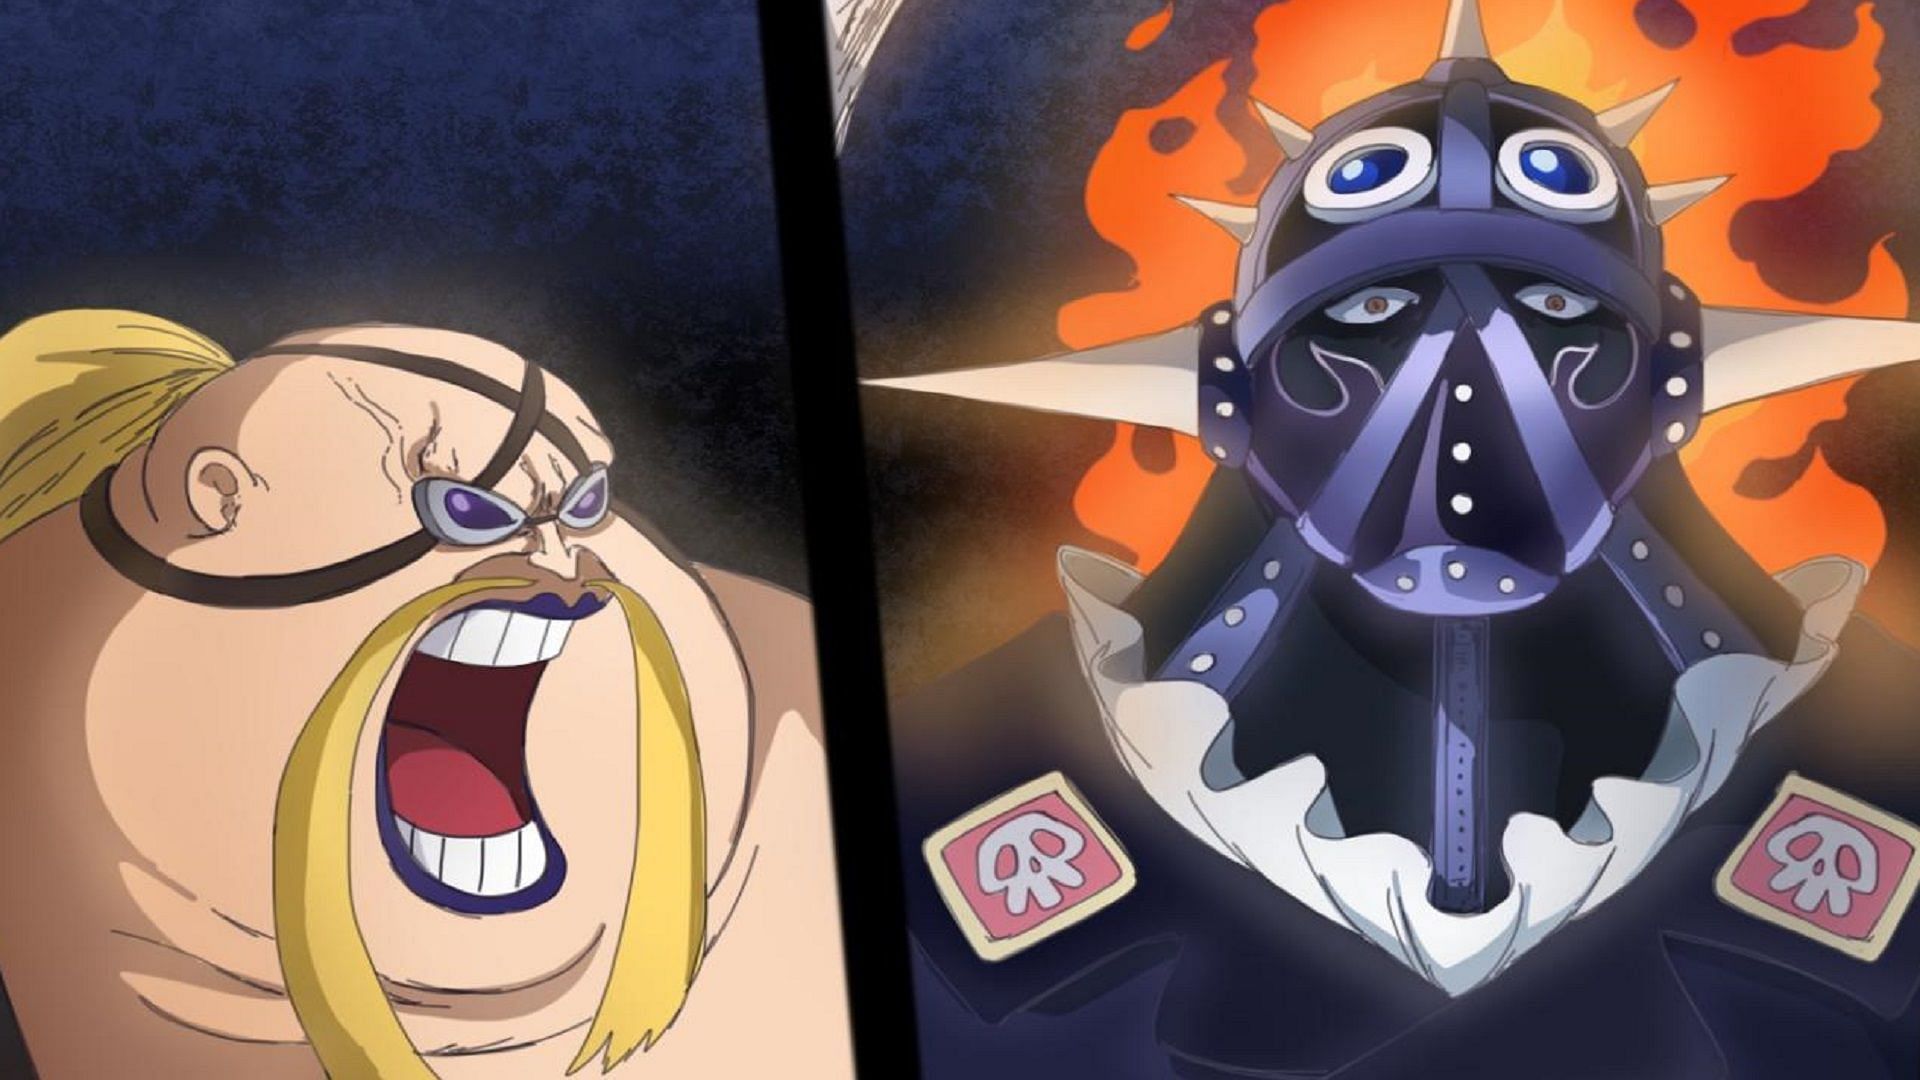 Who is stronger, King or Queen One Piece? - Quora